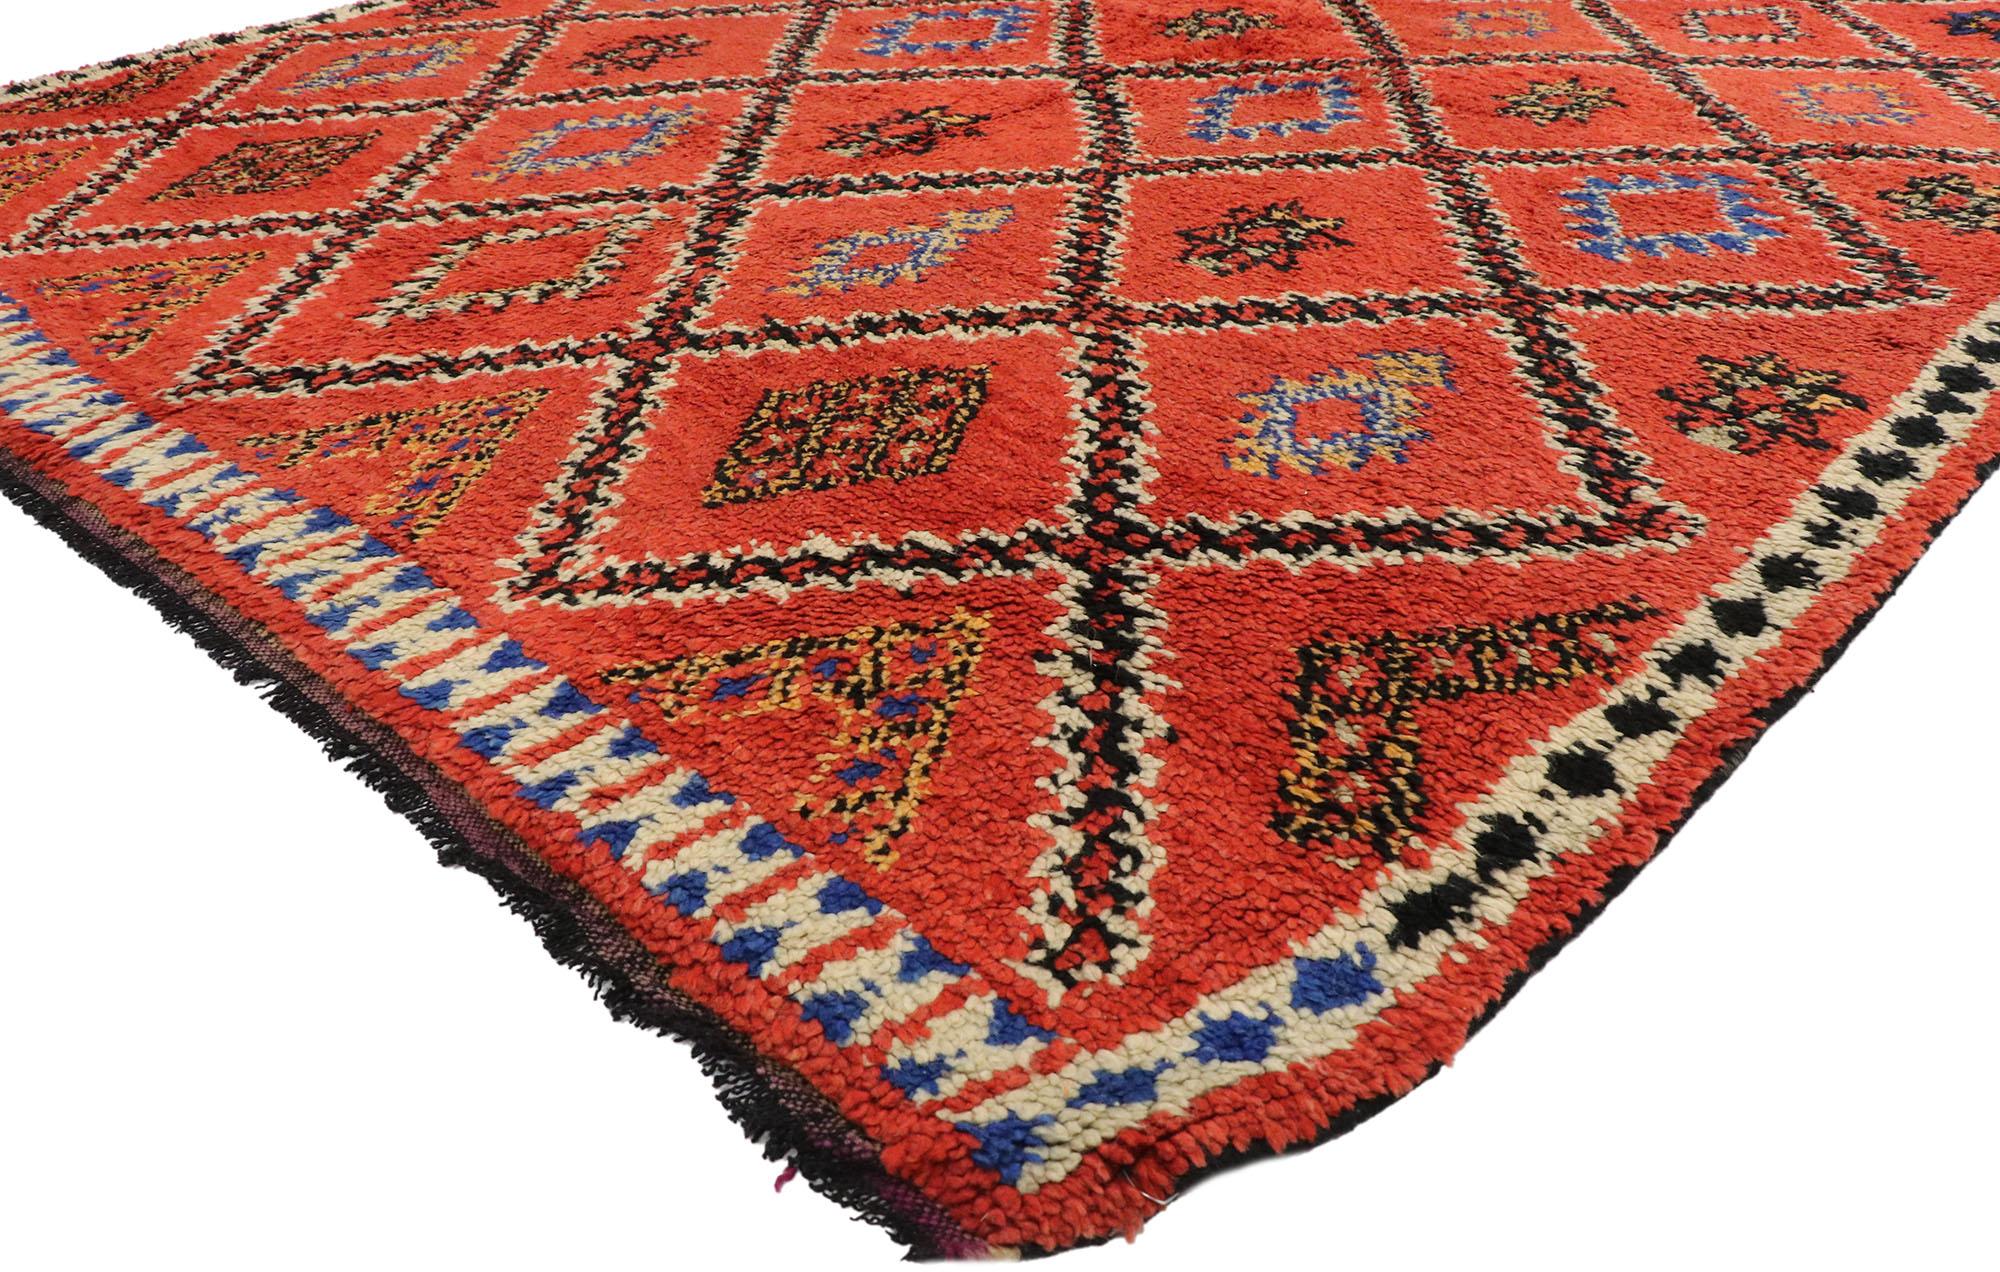 20251, vintage Berber Red Moroccan rug with Modern Northwestern Tribal style. With its bold hues and beguiling beauty, this hand knotted wool vintage Berber Moroccan rug beautifully embodies modern northwestern style with tribal vibes. The abrashed